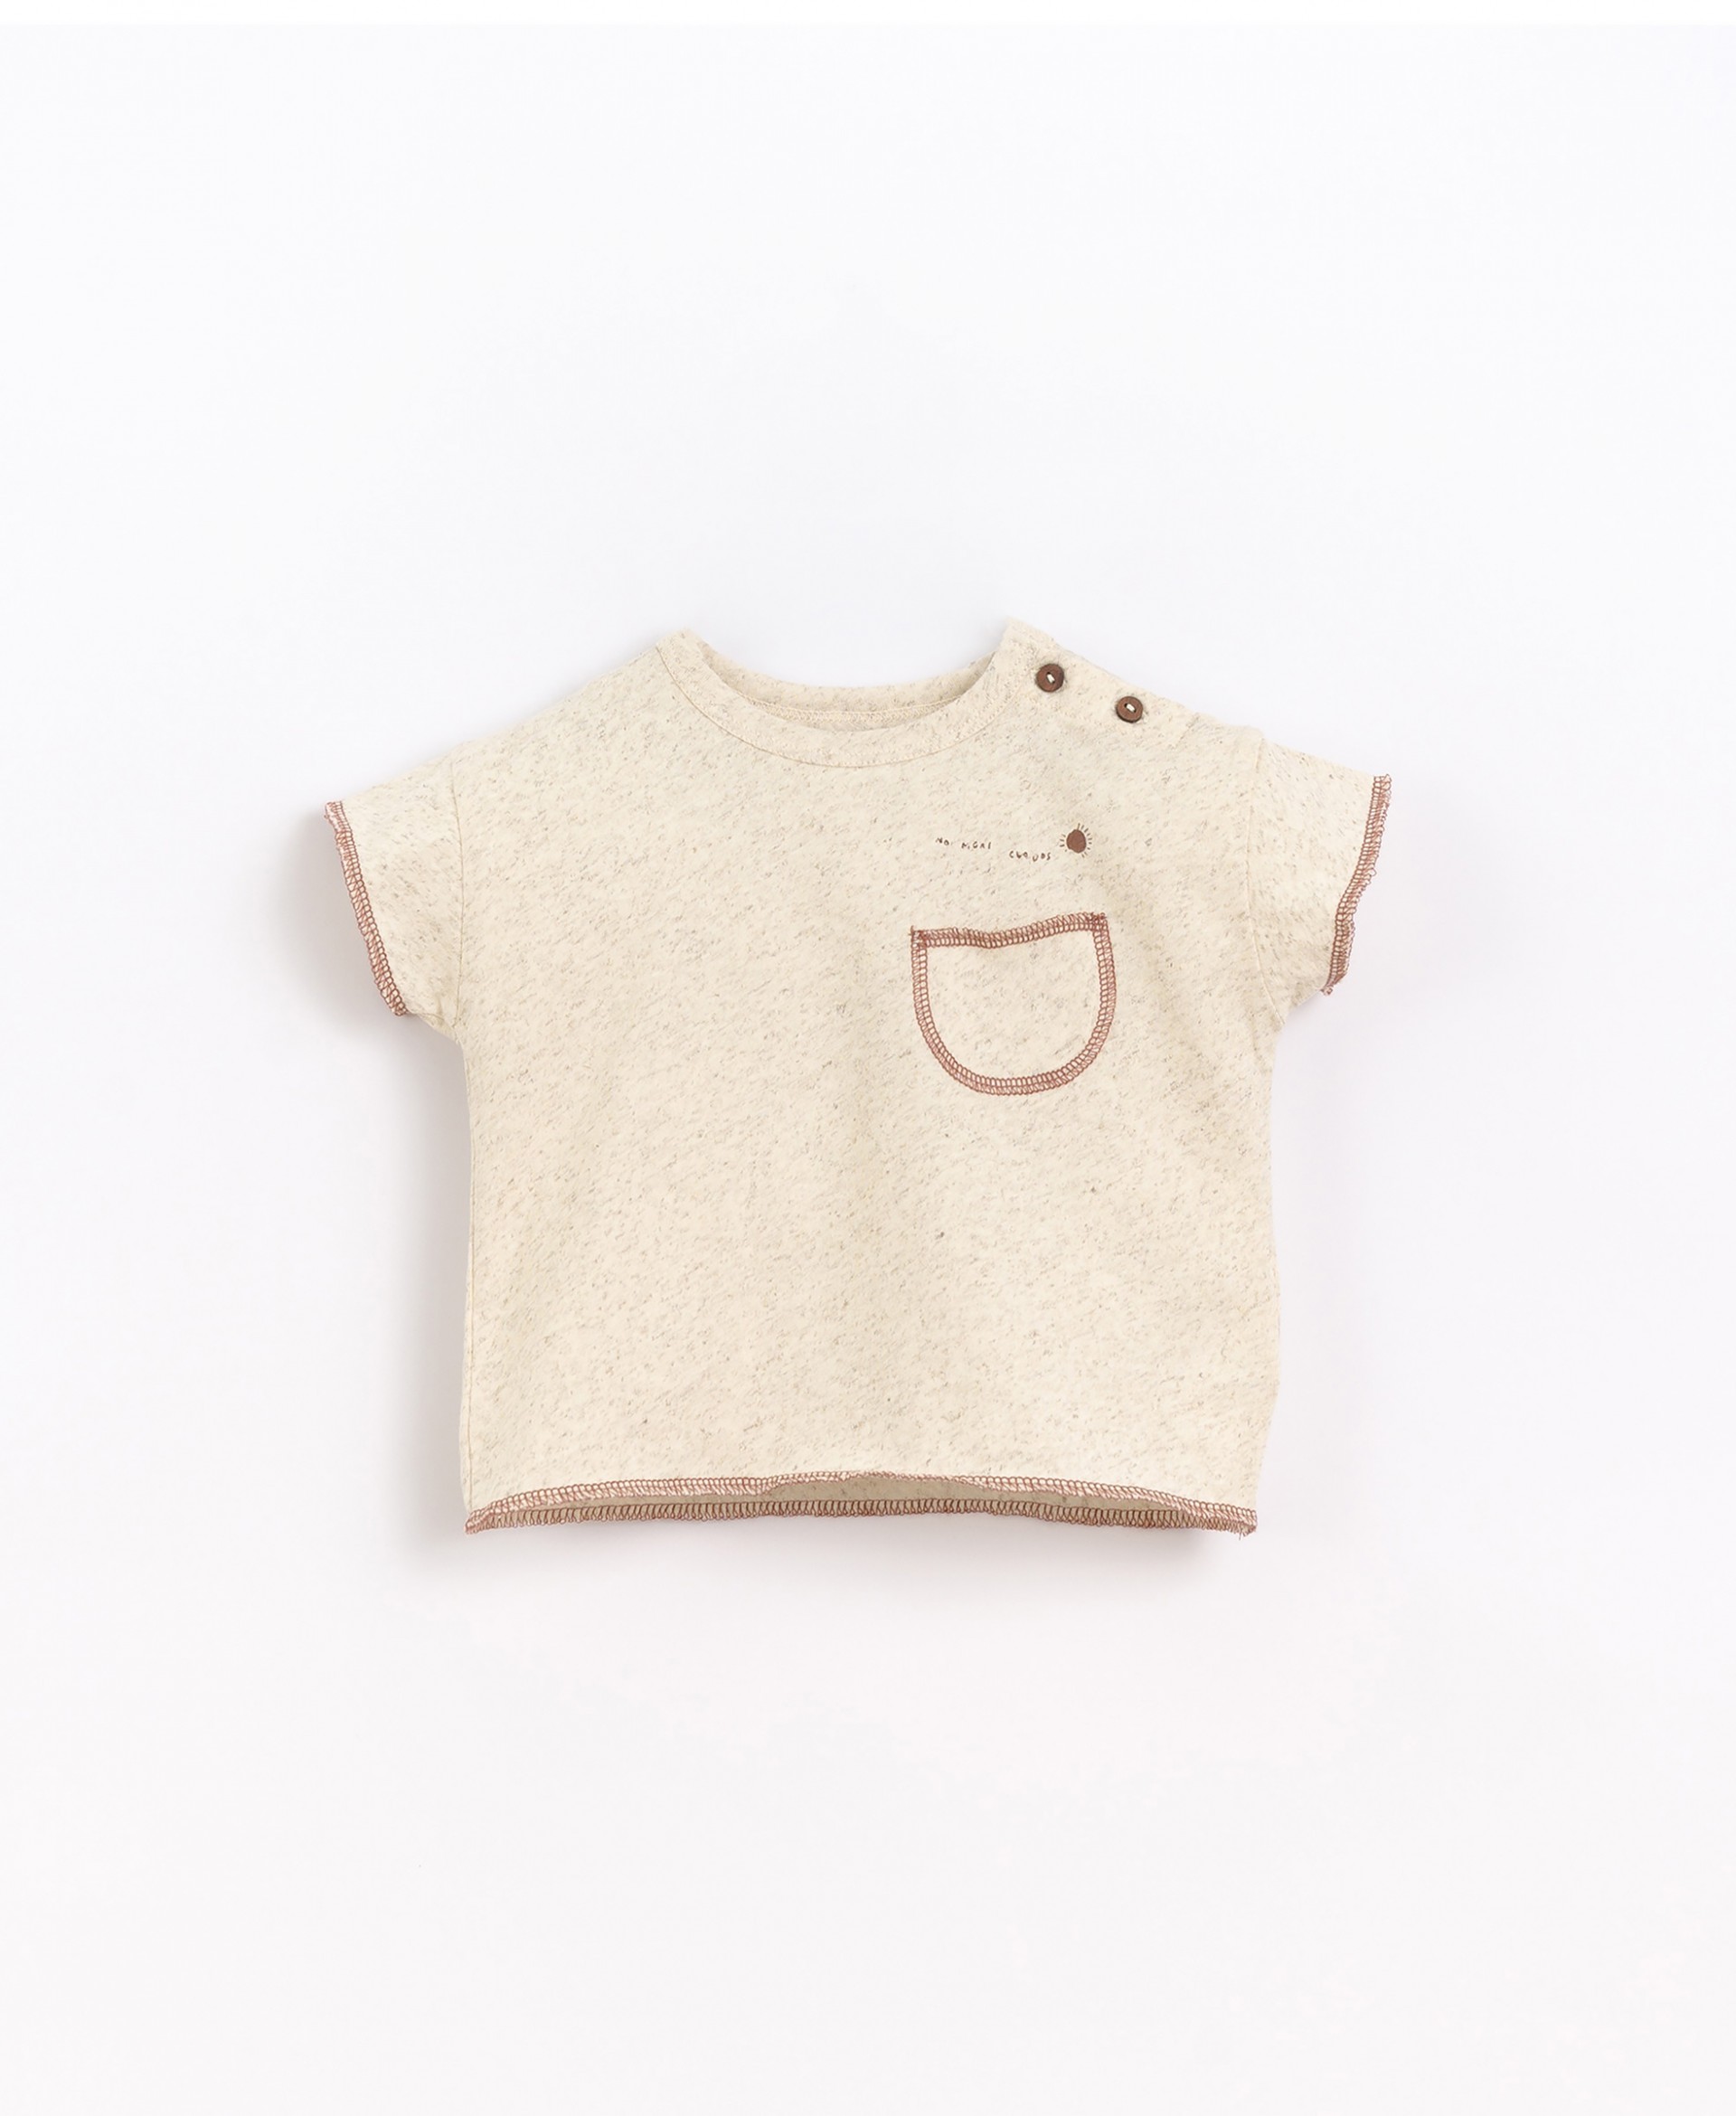 T-shirt in mix of organic cotton and hemp | Basketry